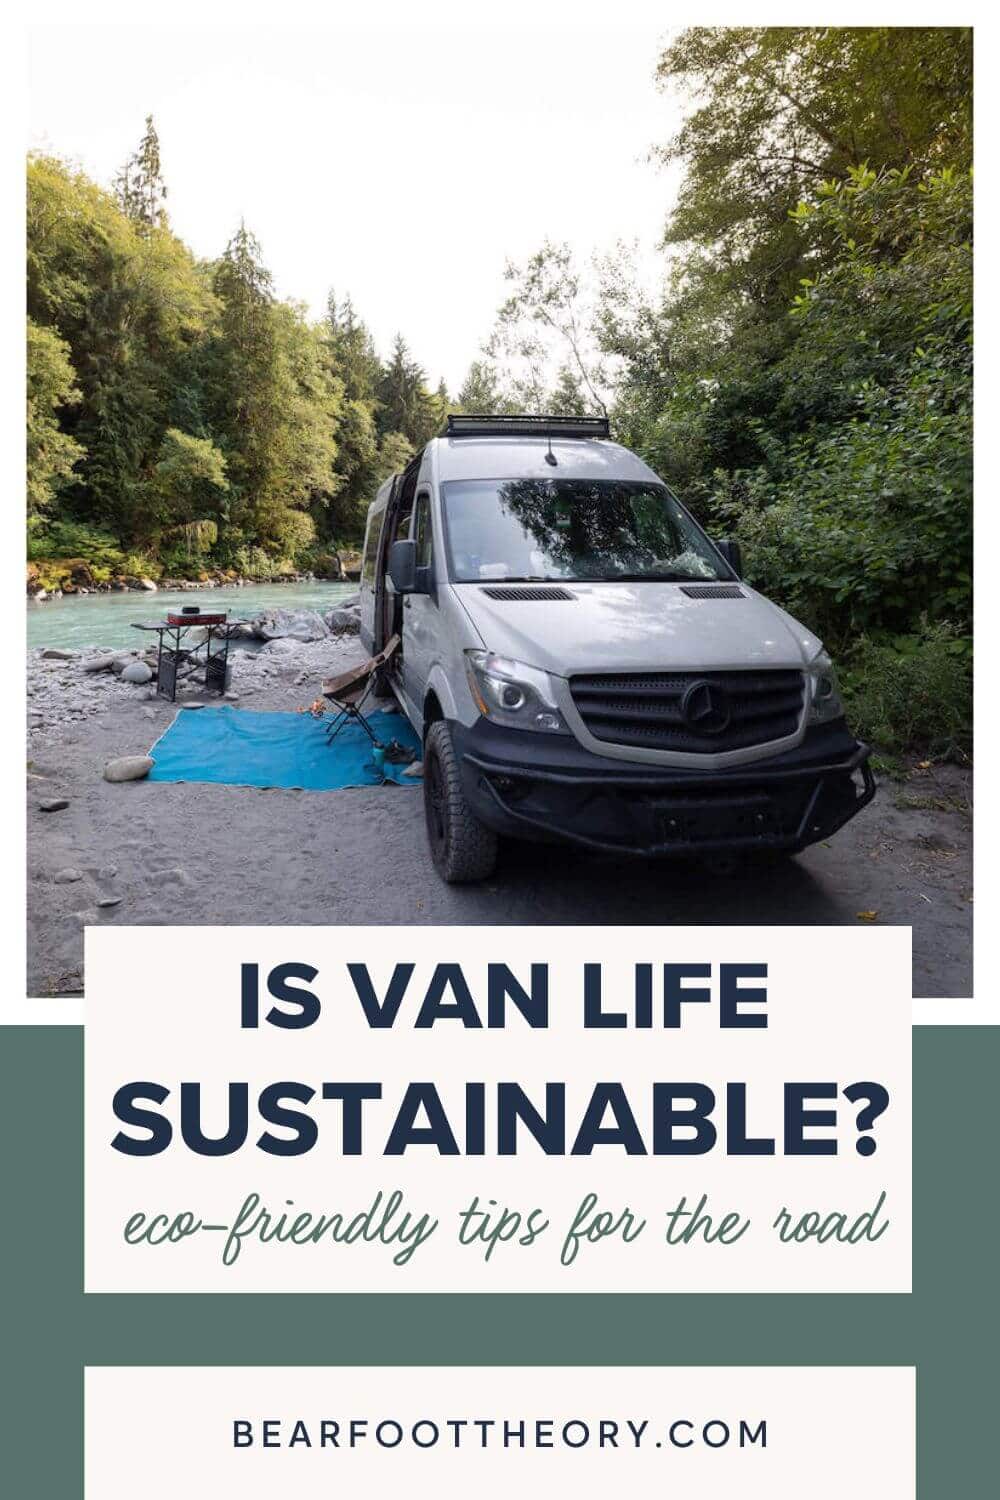 Is van life sustainable? Check out this blog post for eco-friendly tips on how to reduce your impact and live a more sustainable van life